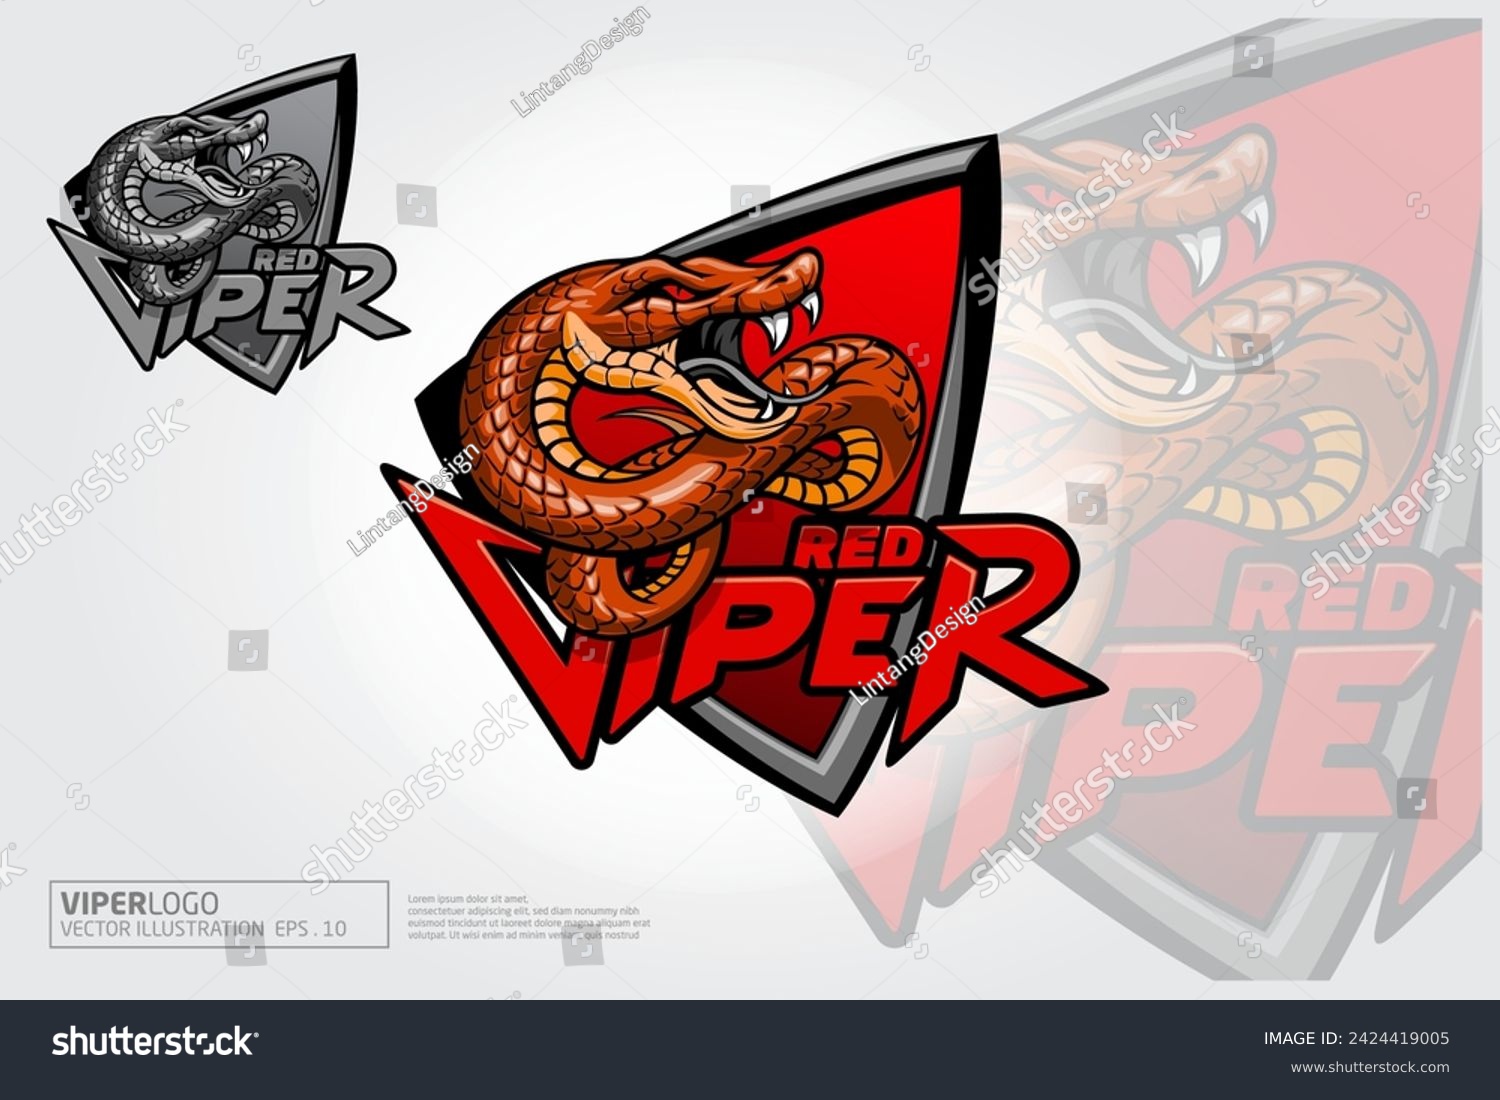 SVG of Red Viper Vector Logo Template. This logo design for all creative business, e sports team or personal, sports, technology, consulting. Excellent logo and unique concept. svg